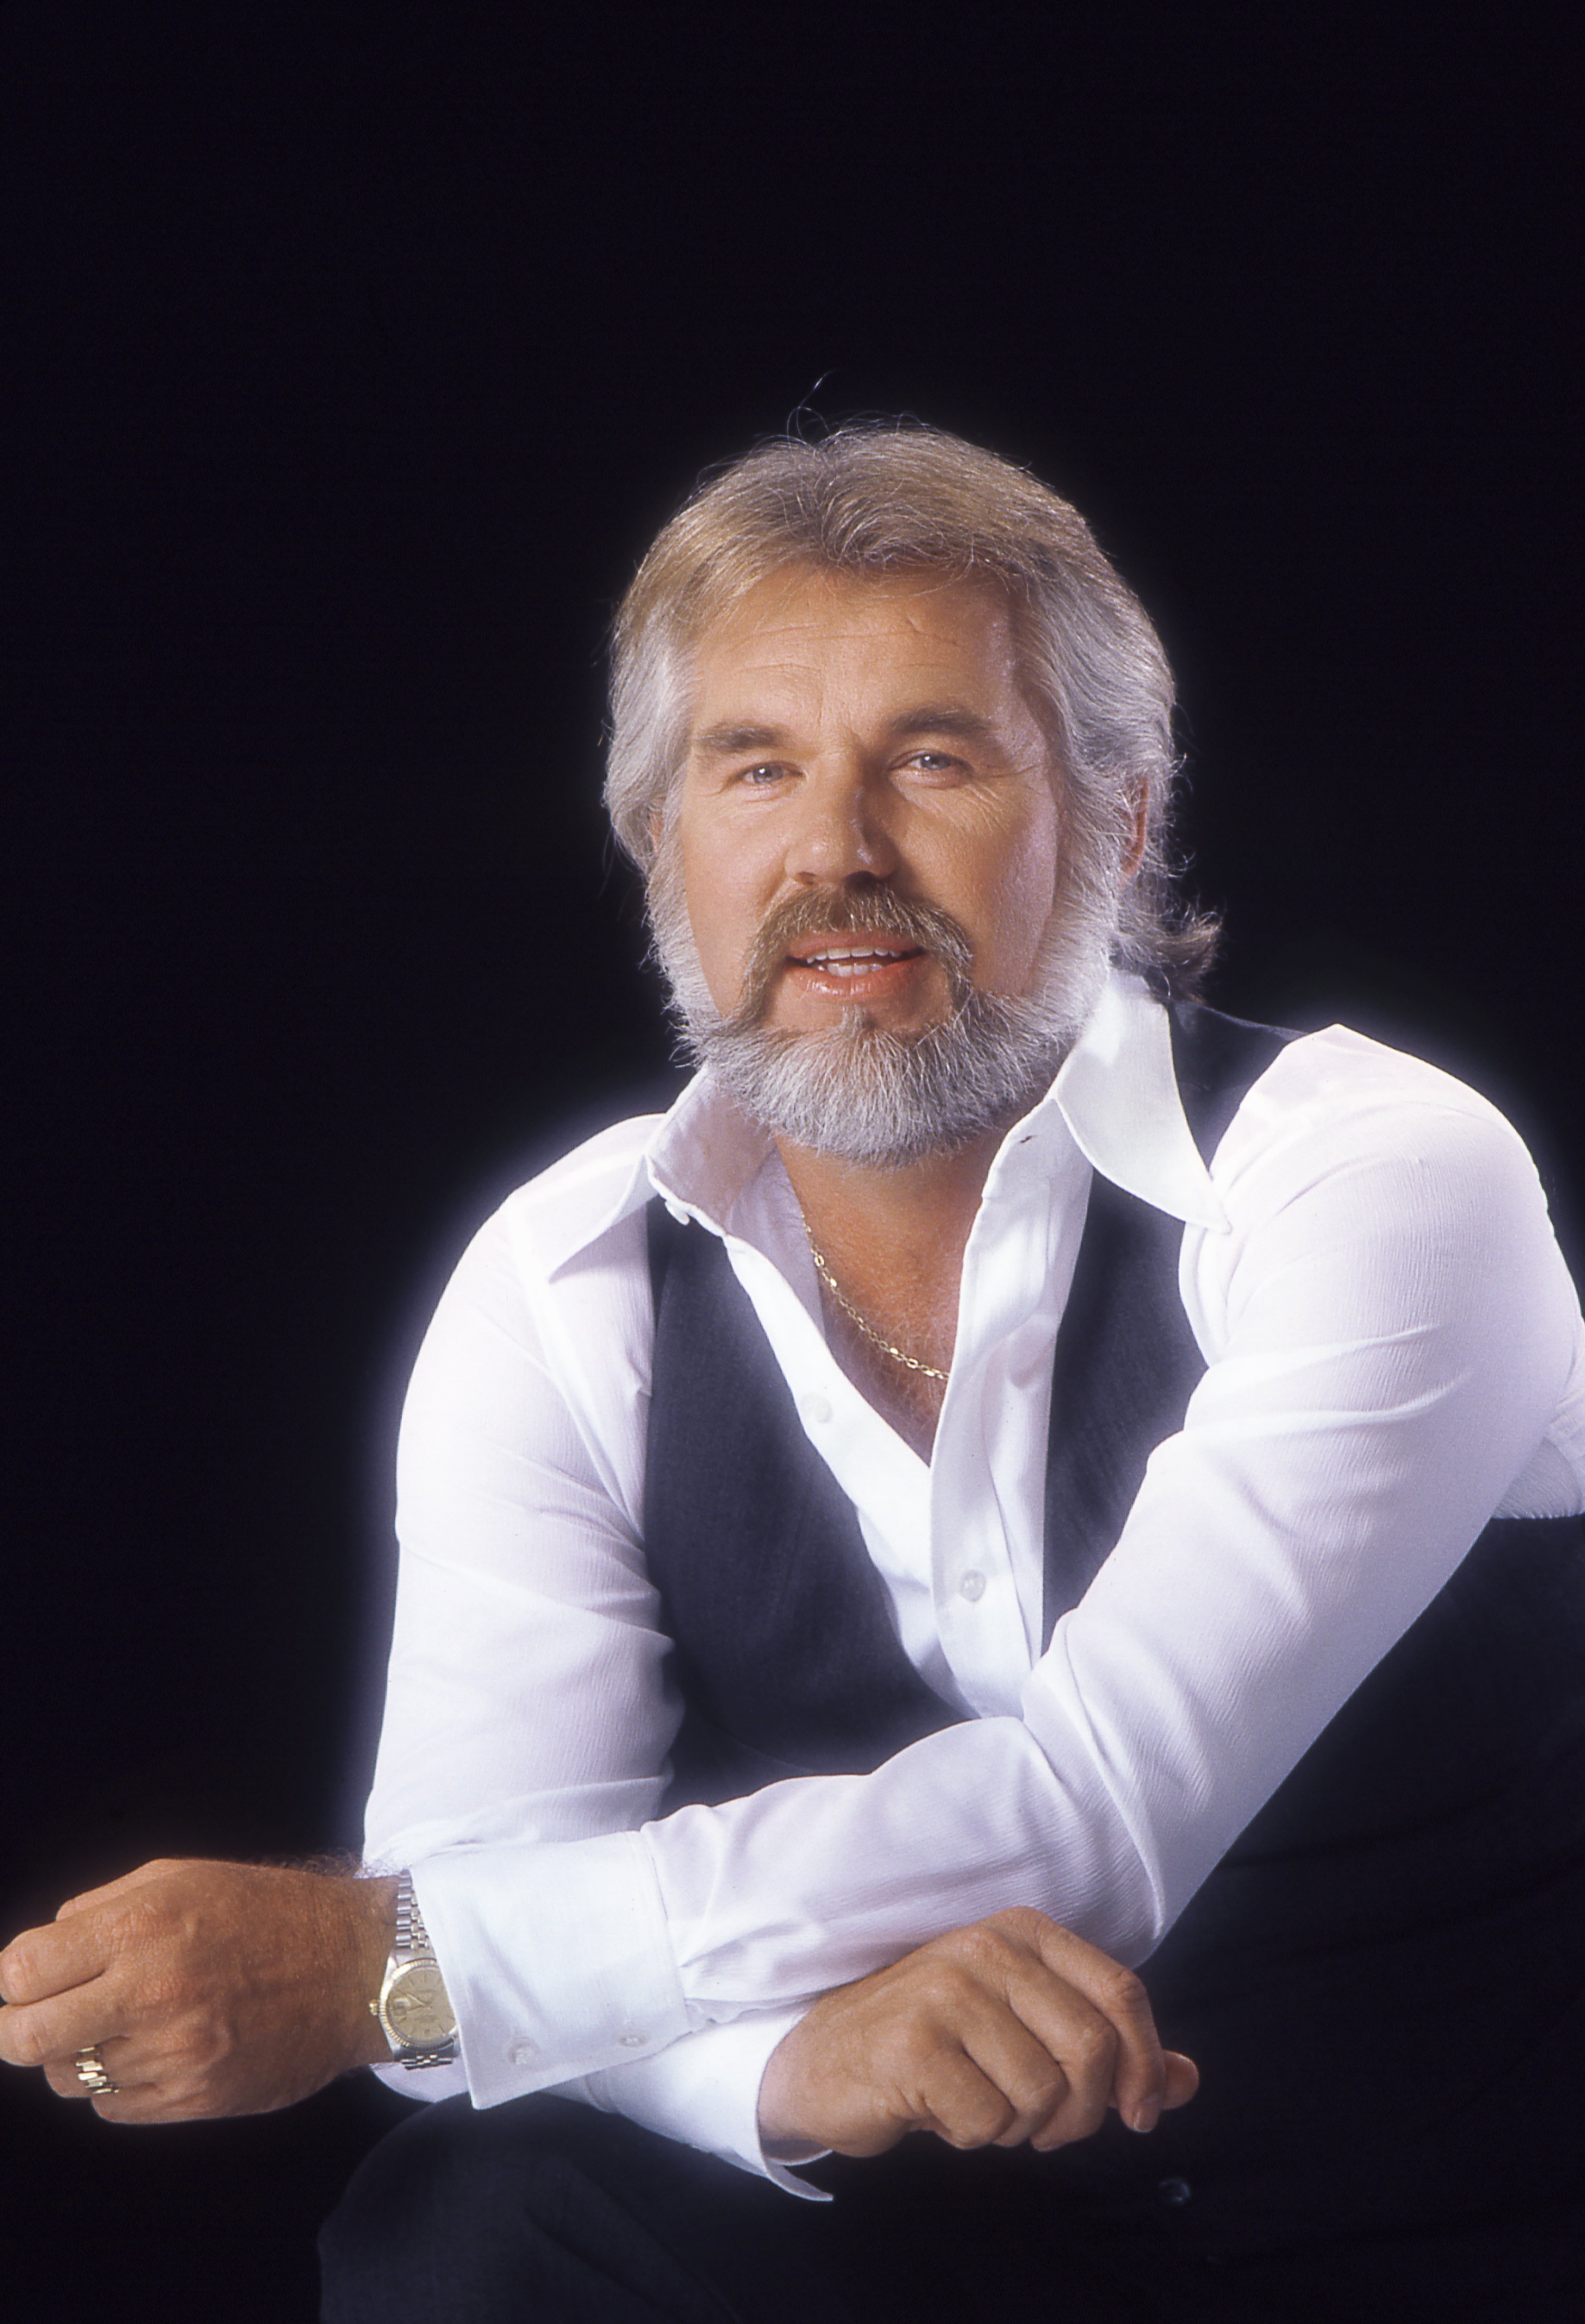 Singer Kenny Rogers poses for a portrait in 1979  | Photo: Getty Images